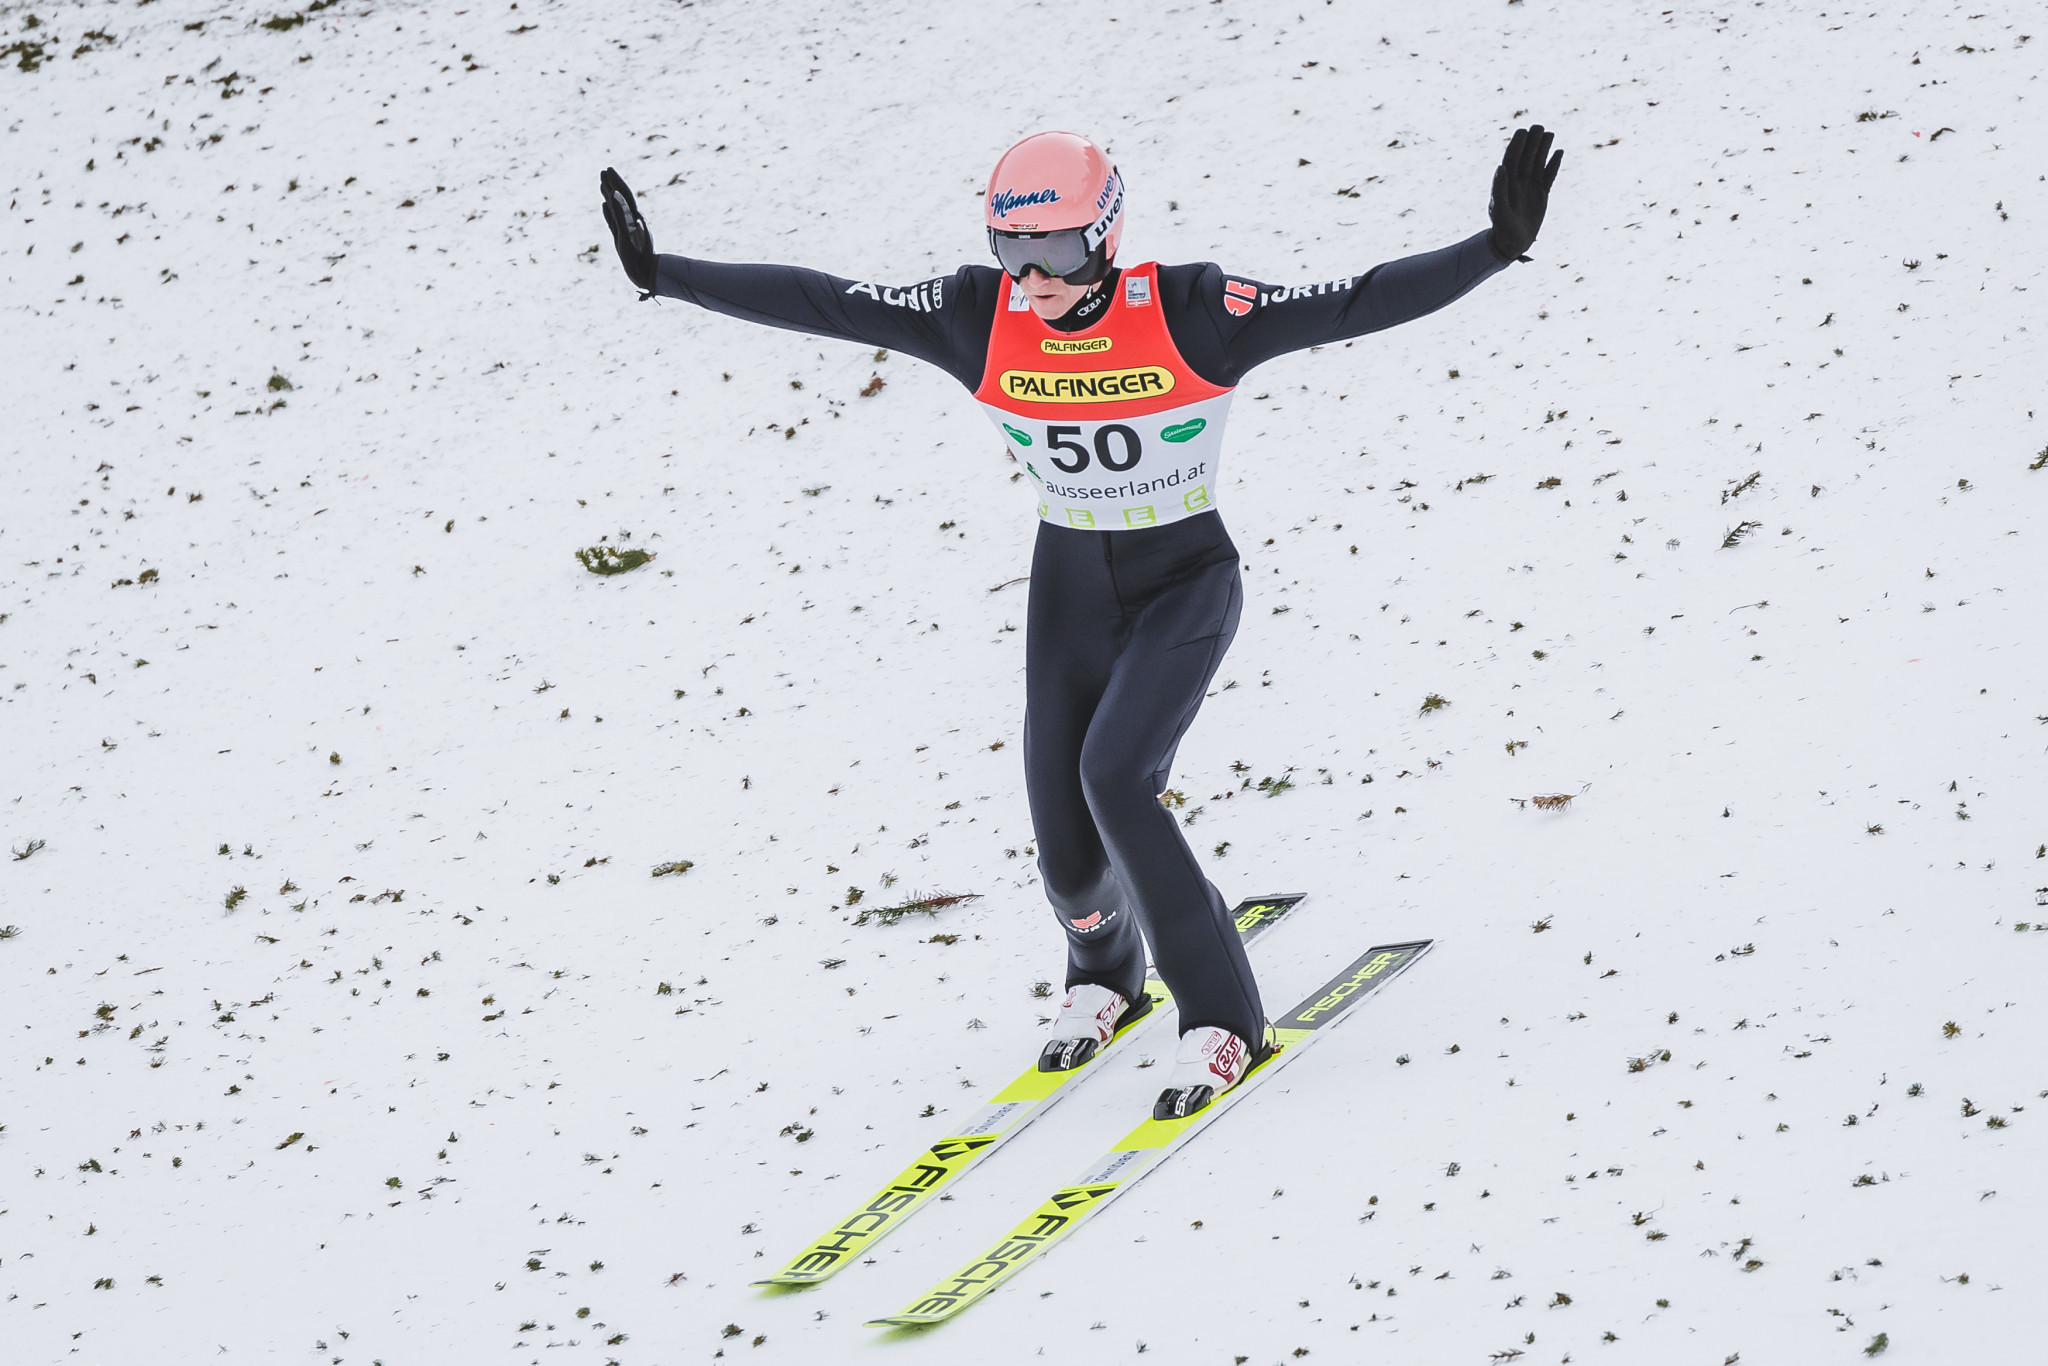 Karl Geiger celebrated victory at the FIS Ski Jumping World Cup in Râșnov ©Getty Images